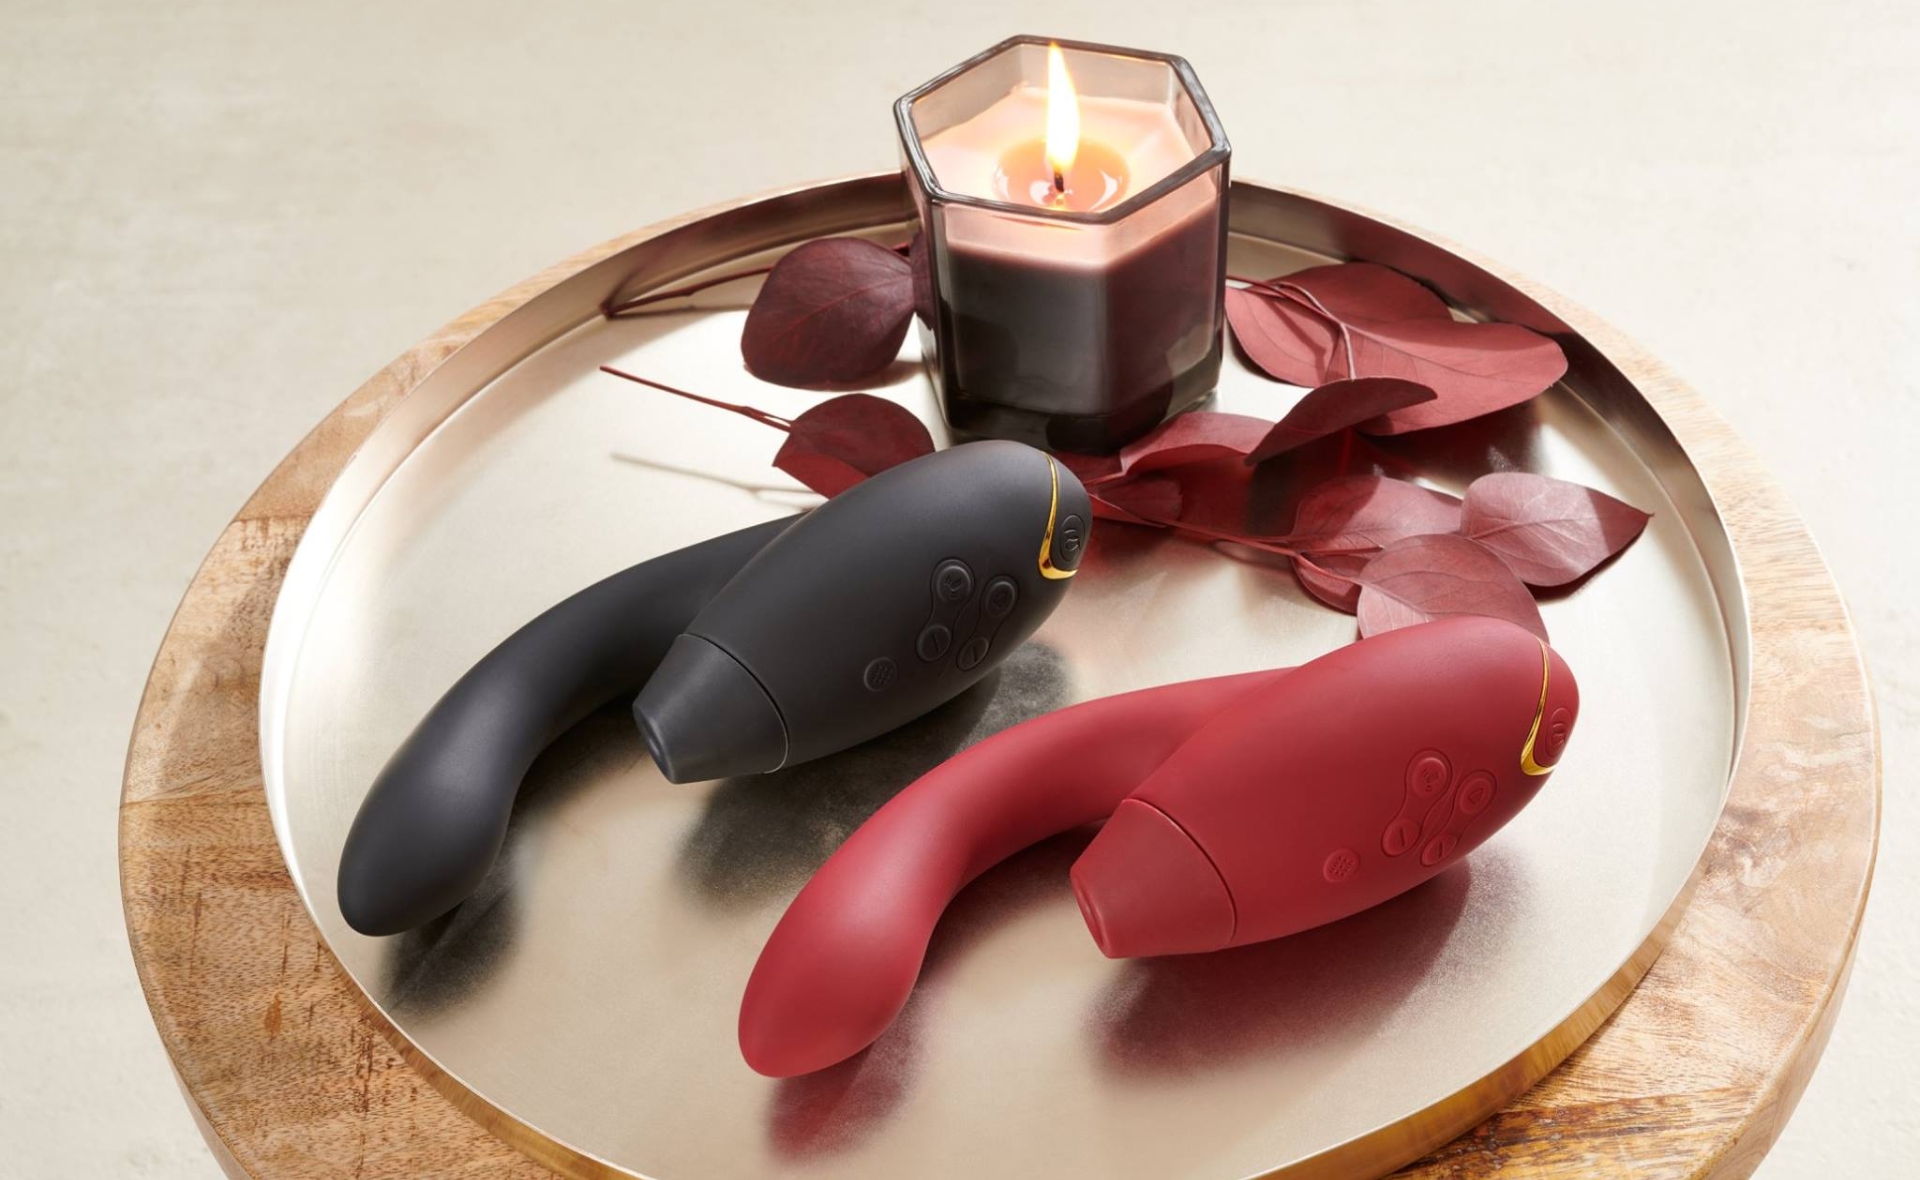 Single on Valentine’s Day? These 13 sex toys will have you feeling the love… and lust